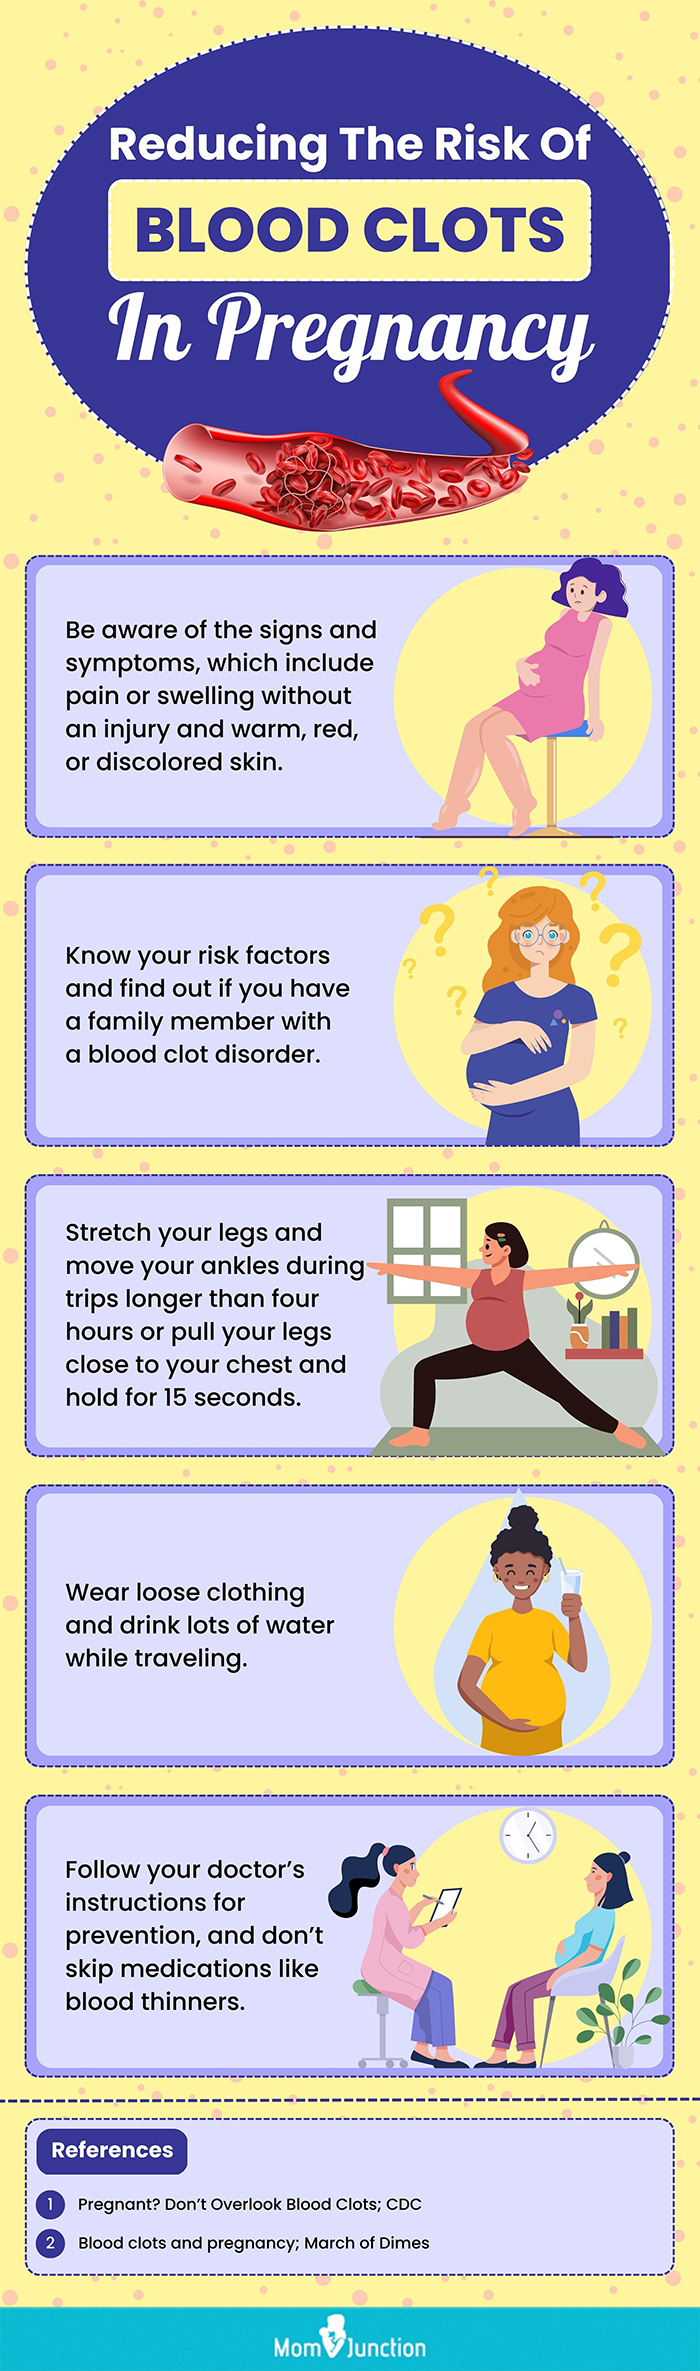 reducing the risk of blood clots in pregnancy (infographic)